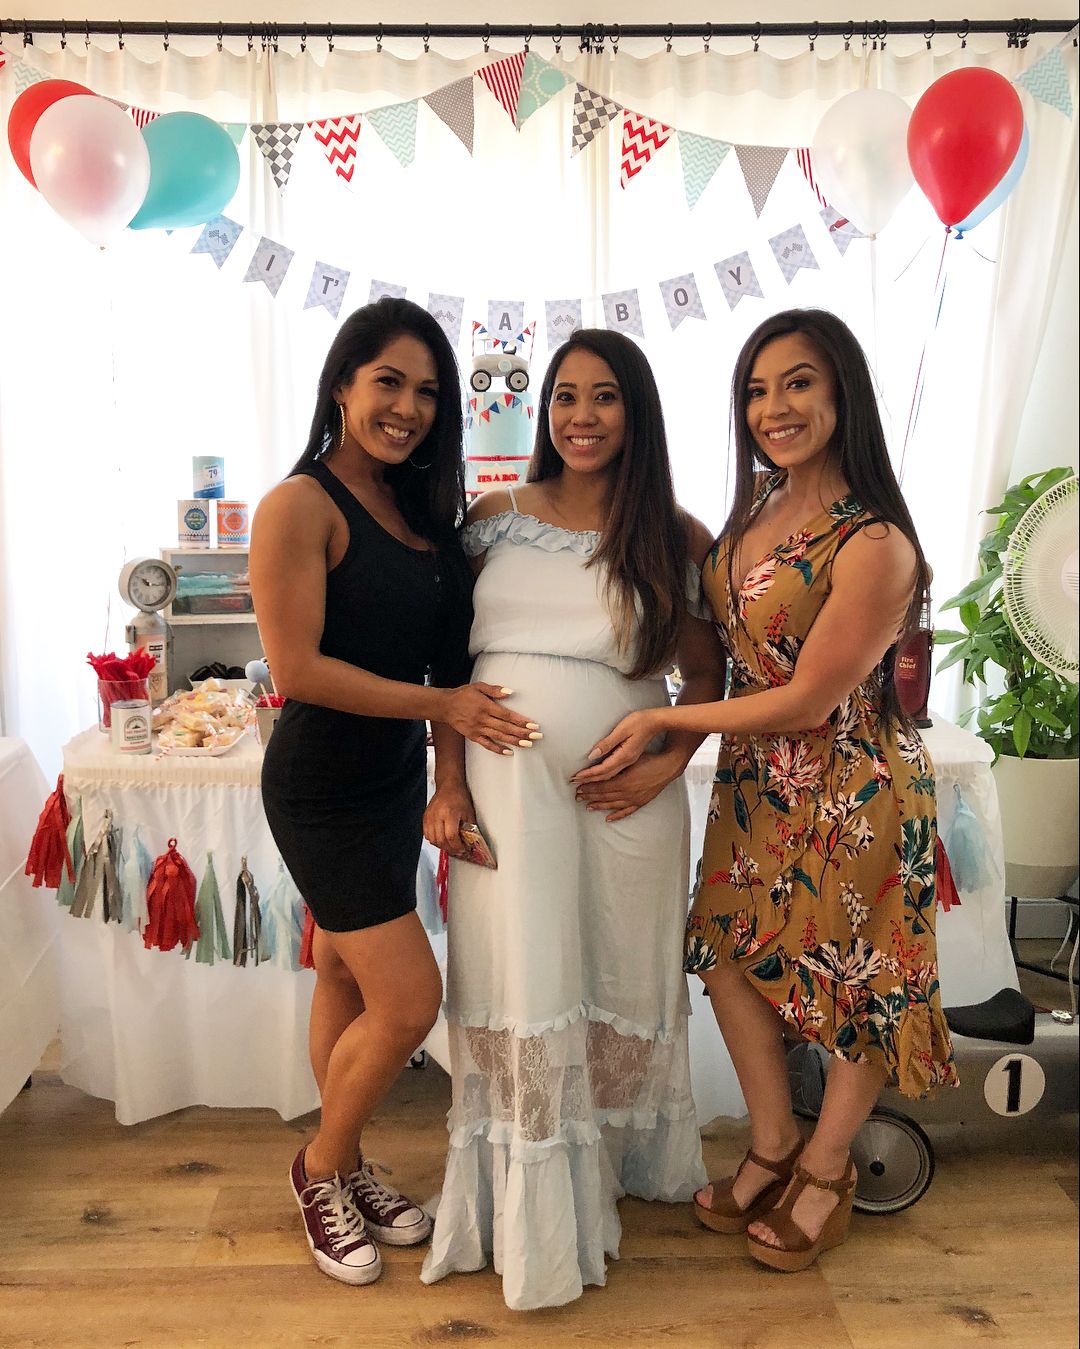 Full Size of Baby Shower:what Should I Wear To My Baby Shower Cute Baby Shower Outfits For Mom Stylish Maternity Dresses For Baby Shower Maternity Clothes Target Long Maternity Dresses Maternity Dresses For Baby Shower Celebrity Baby Shower Dresses Maternity Blouses For Baby Shower